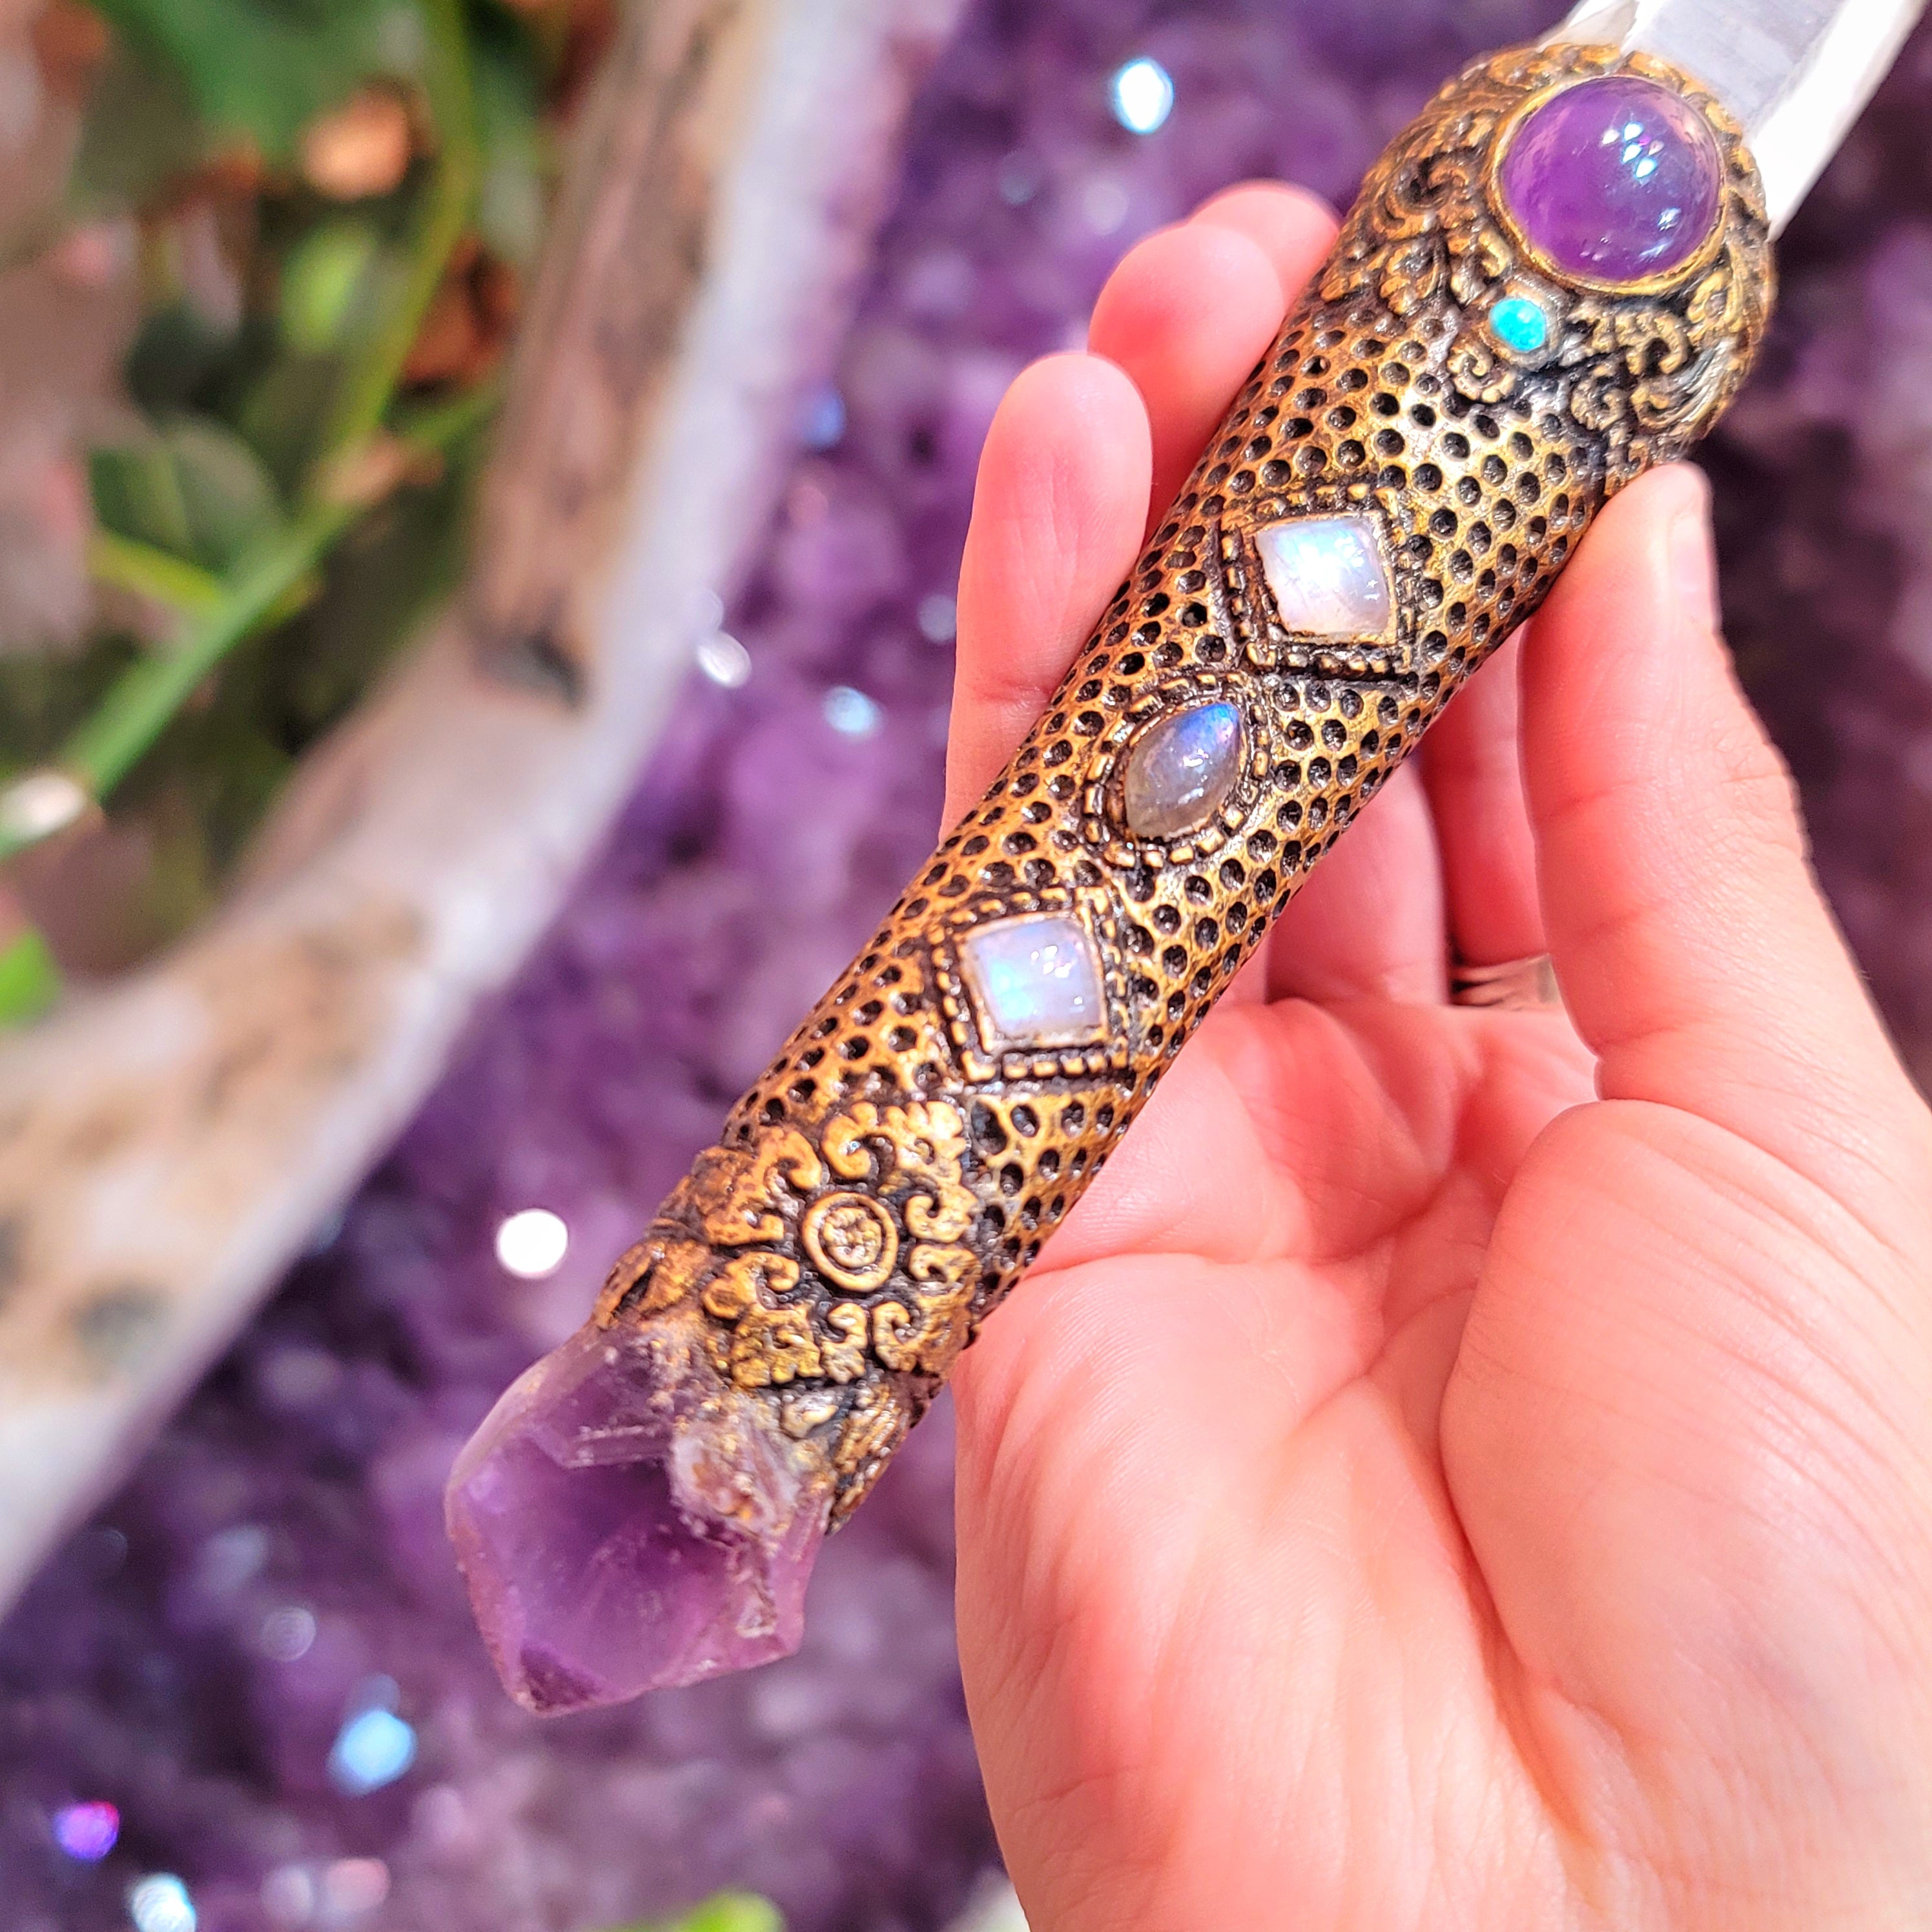 Amethyst, Labradorite, Turquoise, Rainbow Moonstone Wand for Protection and Grounding